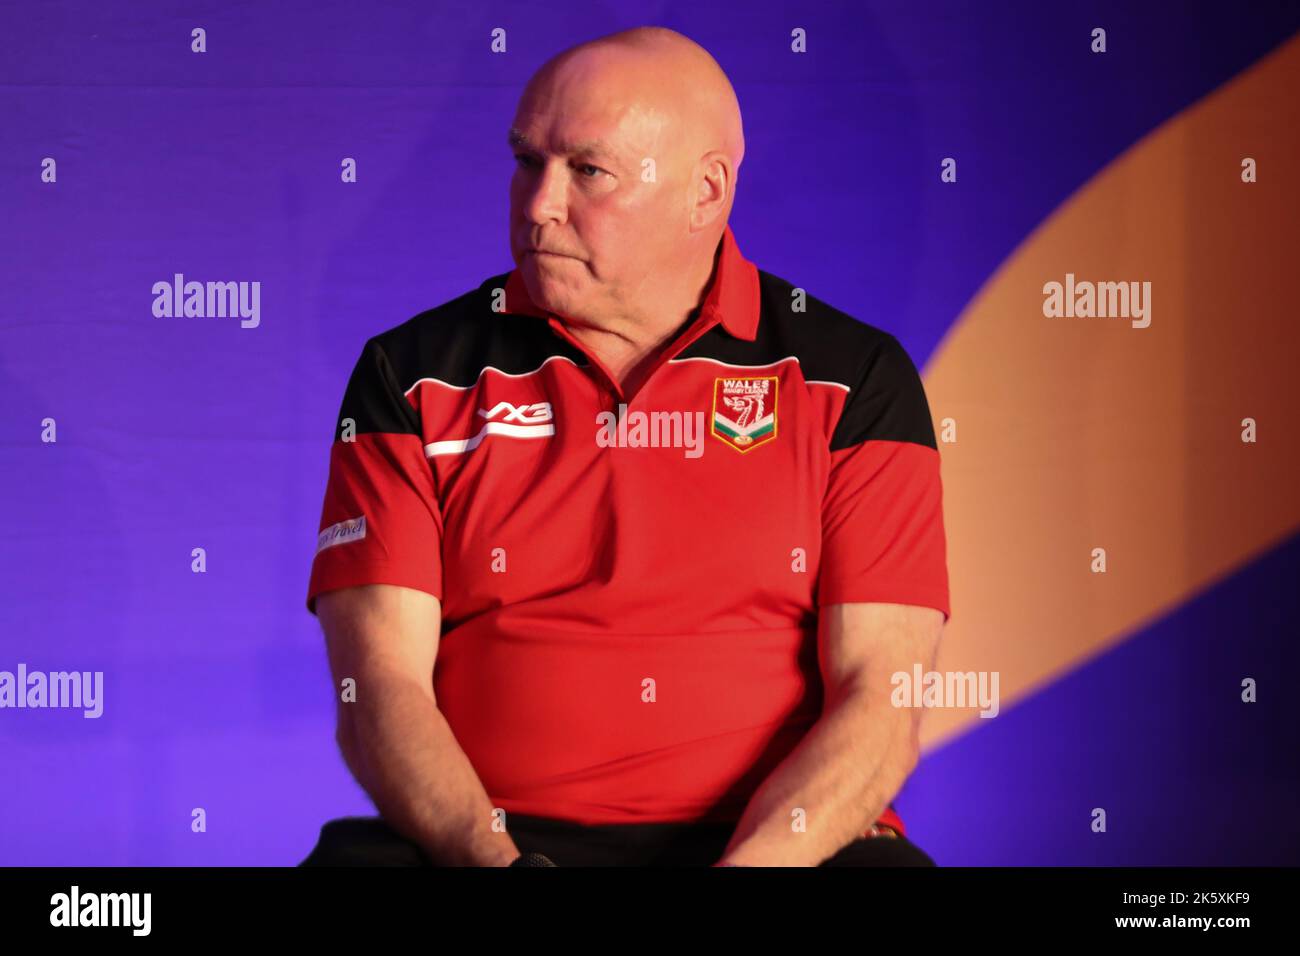 Manchester, UK. 10th Oct, 2022. Science and Industry Museum, Liverpool Road, Manchester, 10th October 2022. Rugby League World Cup 2021 Tournament Launch John Kear (Head Coach) of Wales speaks during the Rugby League World Cup 2021 Tournament Launch Credit: Touchlinepics/Alamy Live News Stock Photo